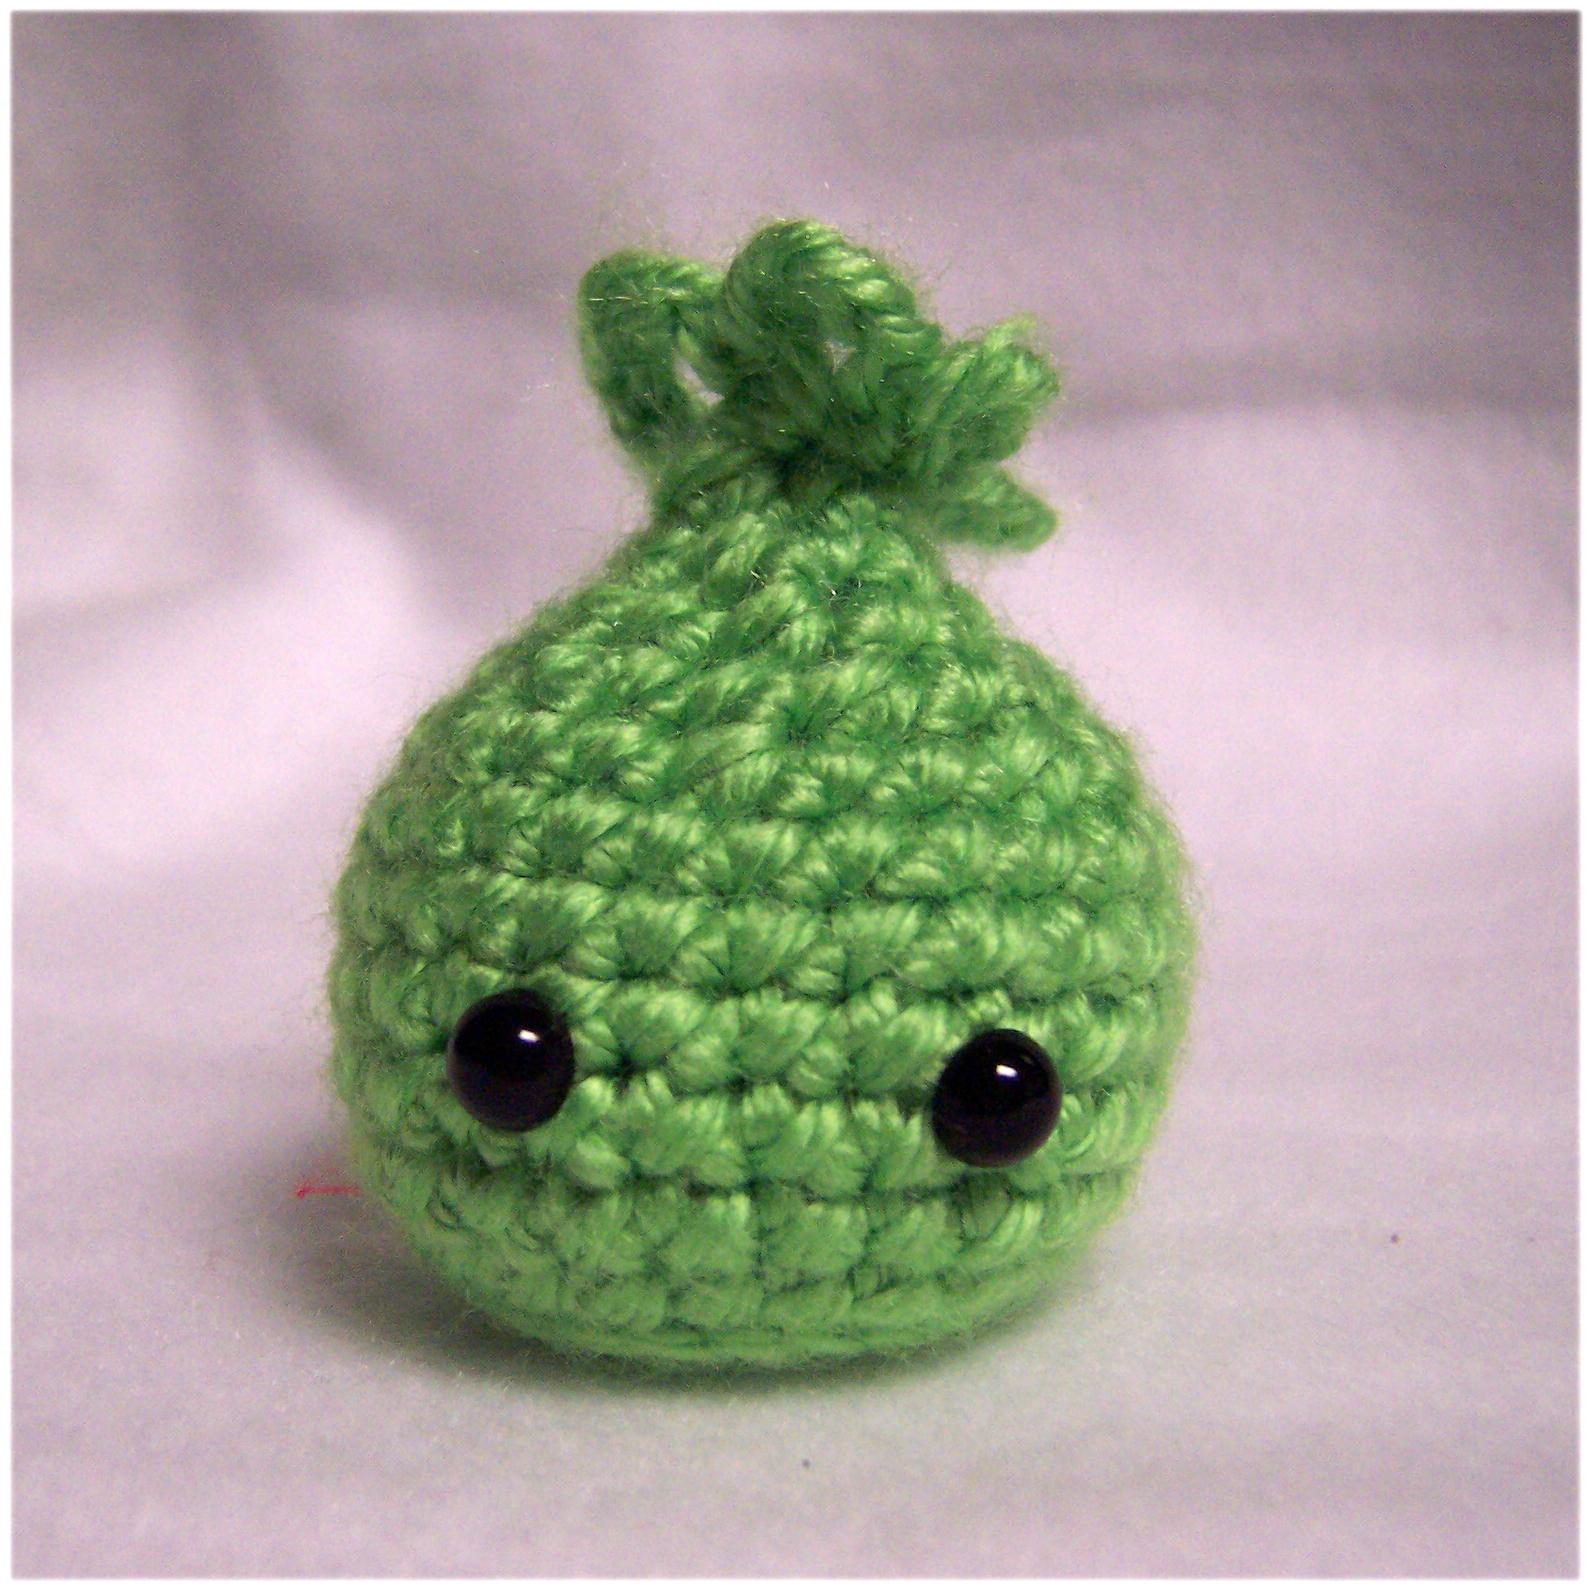 [Onion+Sprout.JPG]